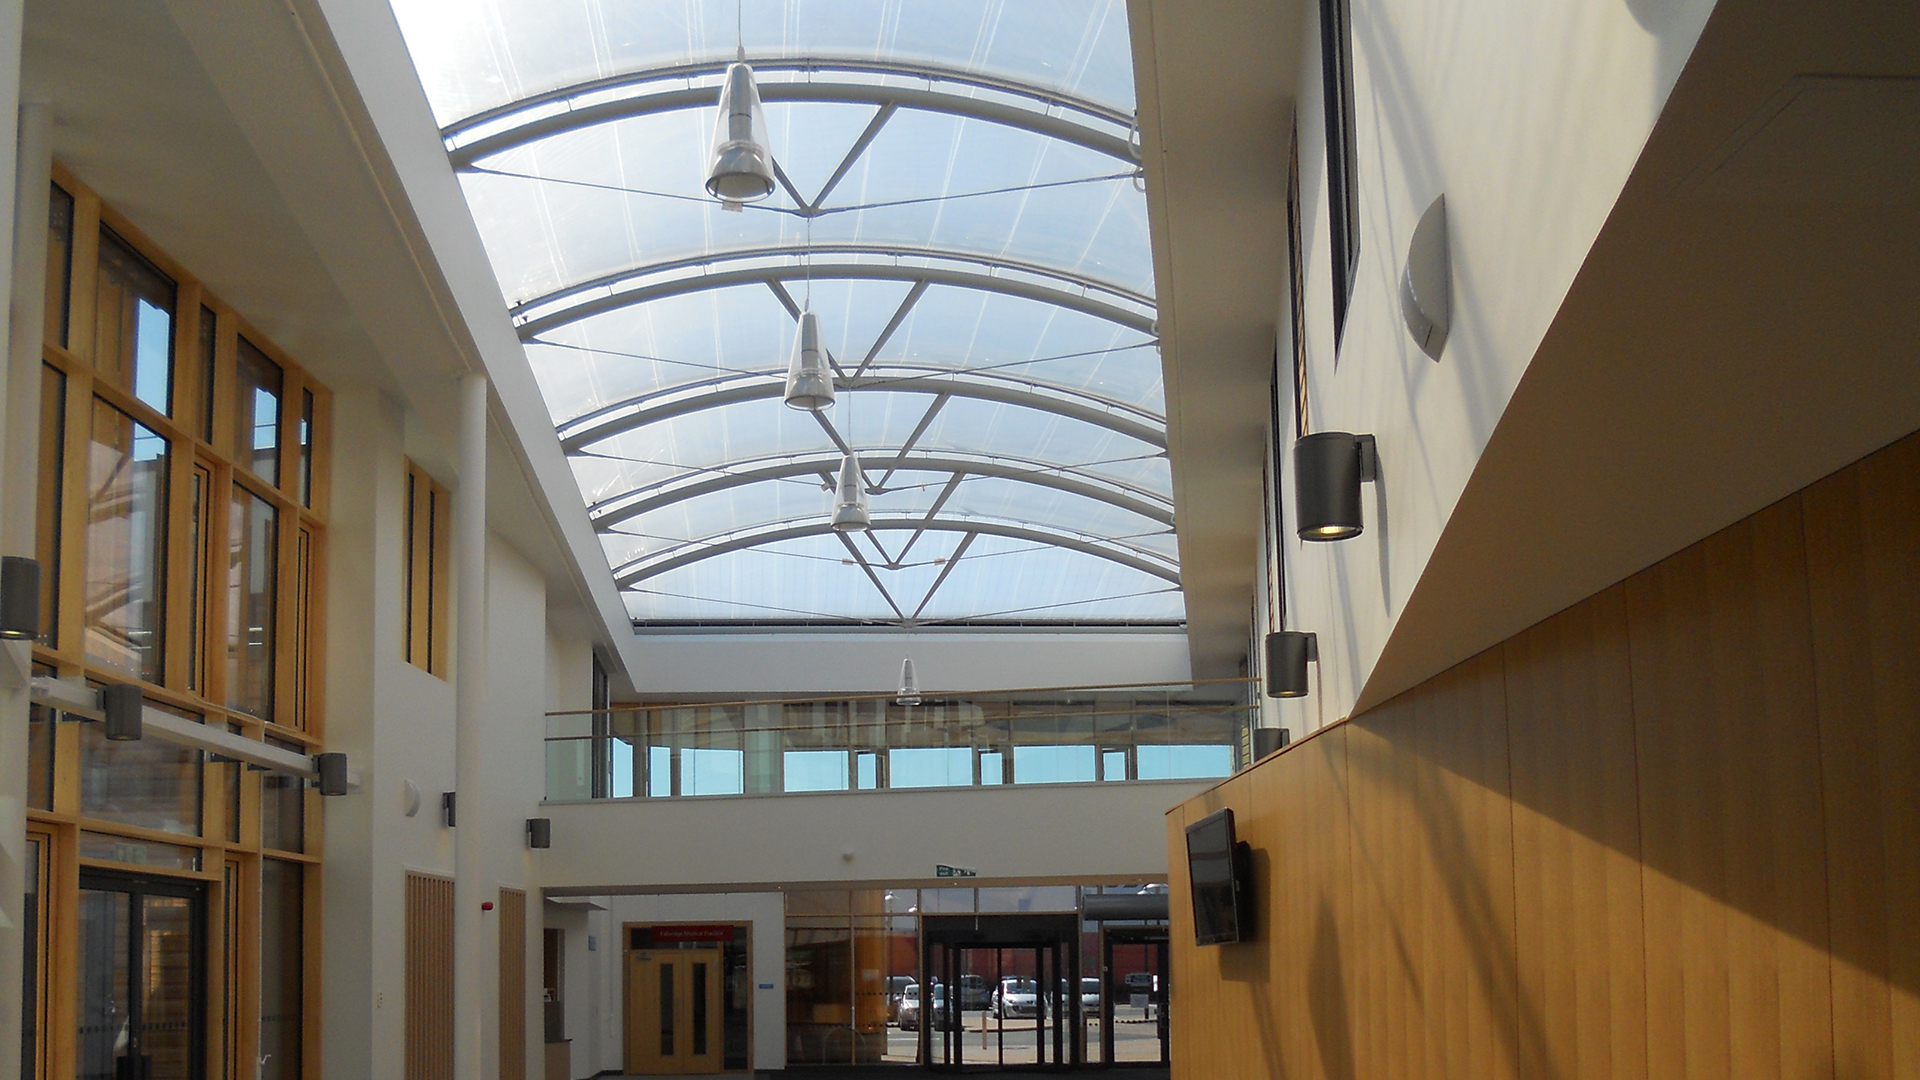 The central atrium of the facility is covered by a Texlon® ETFE cladding system,which ensures that natural daylight floods the space.